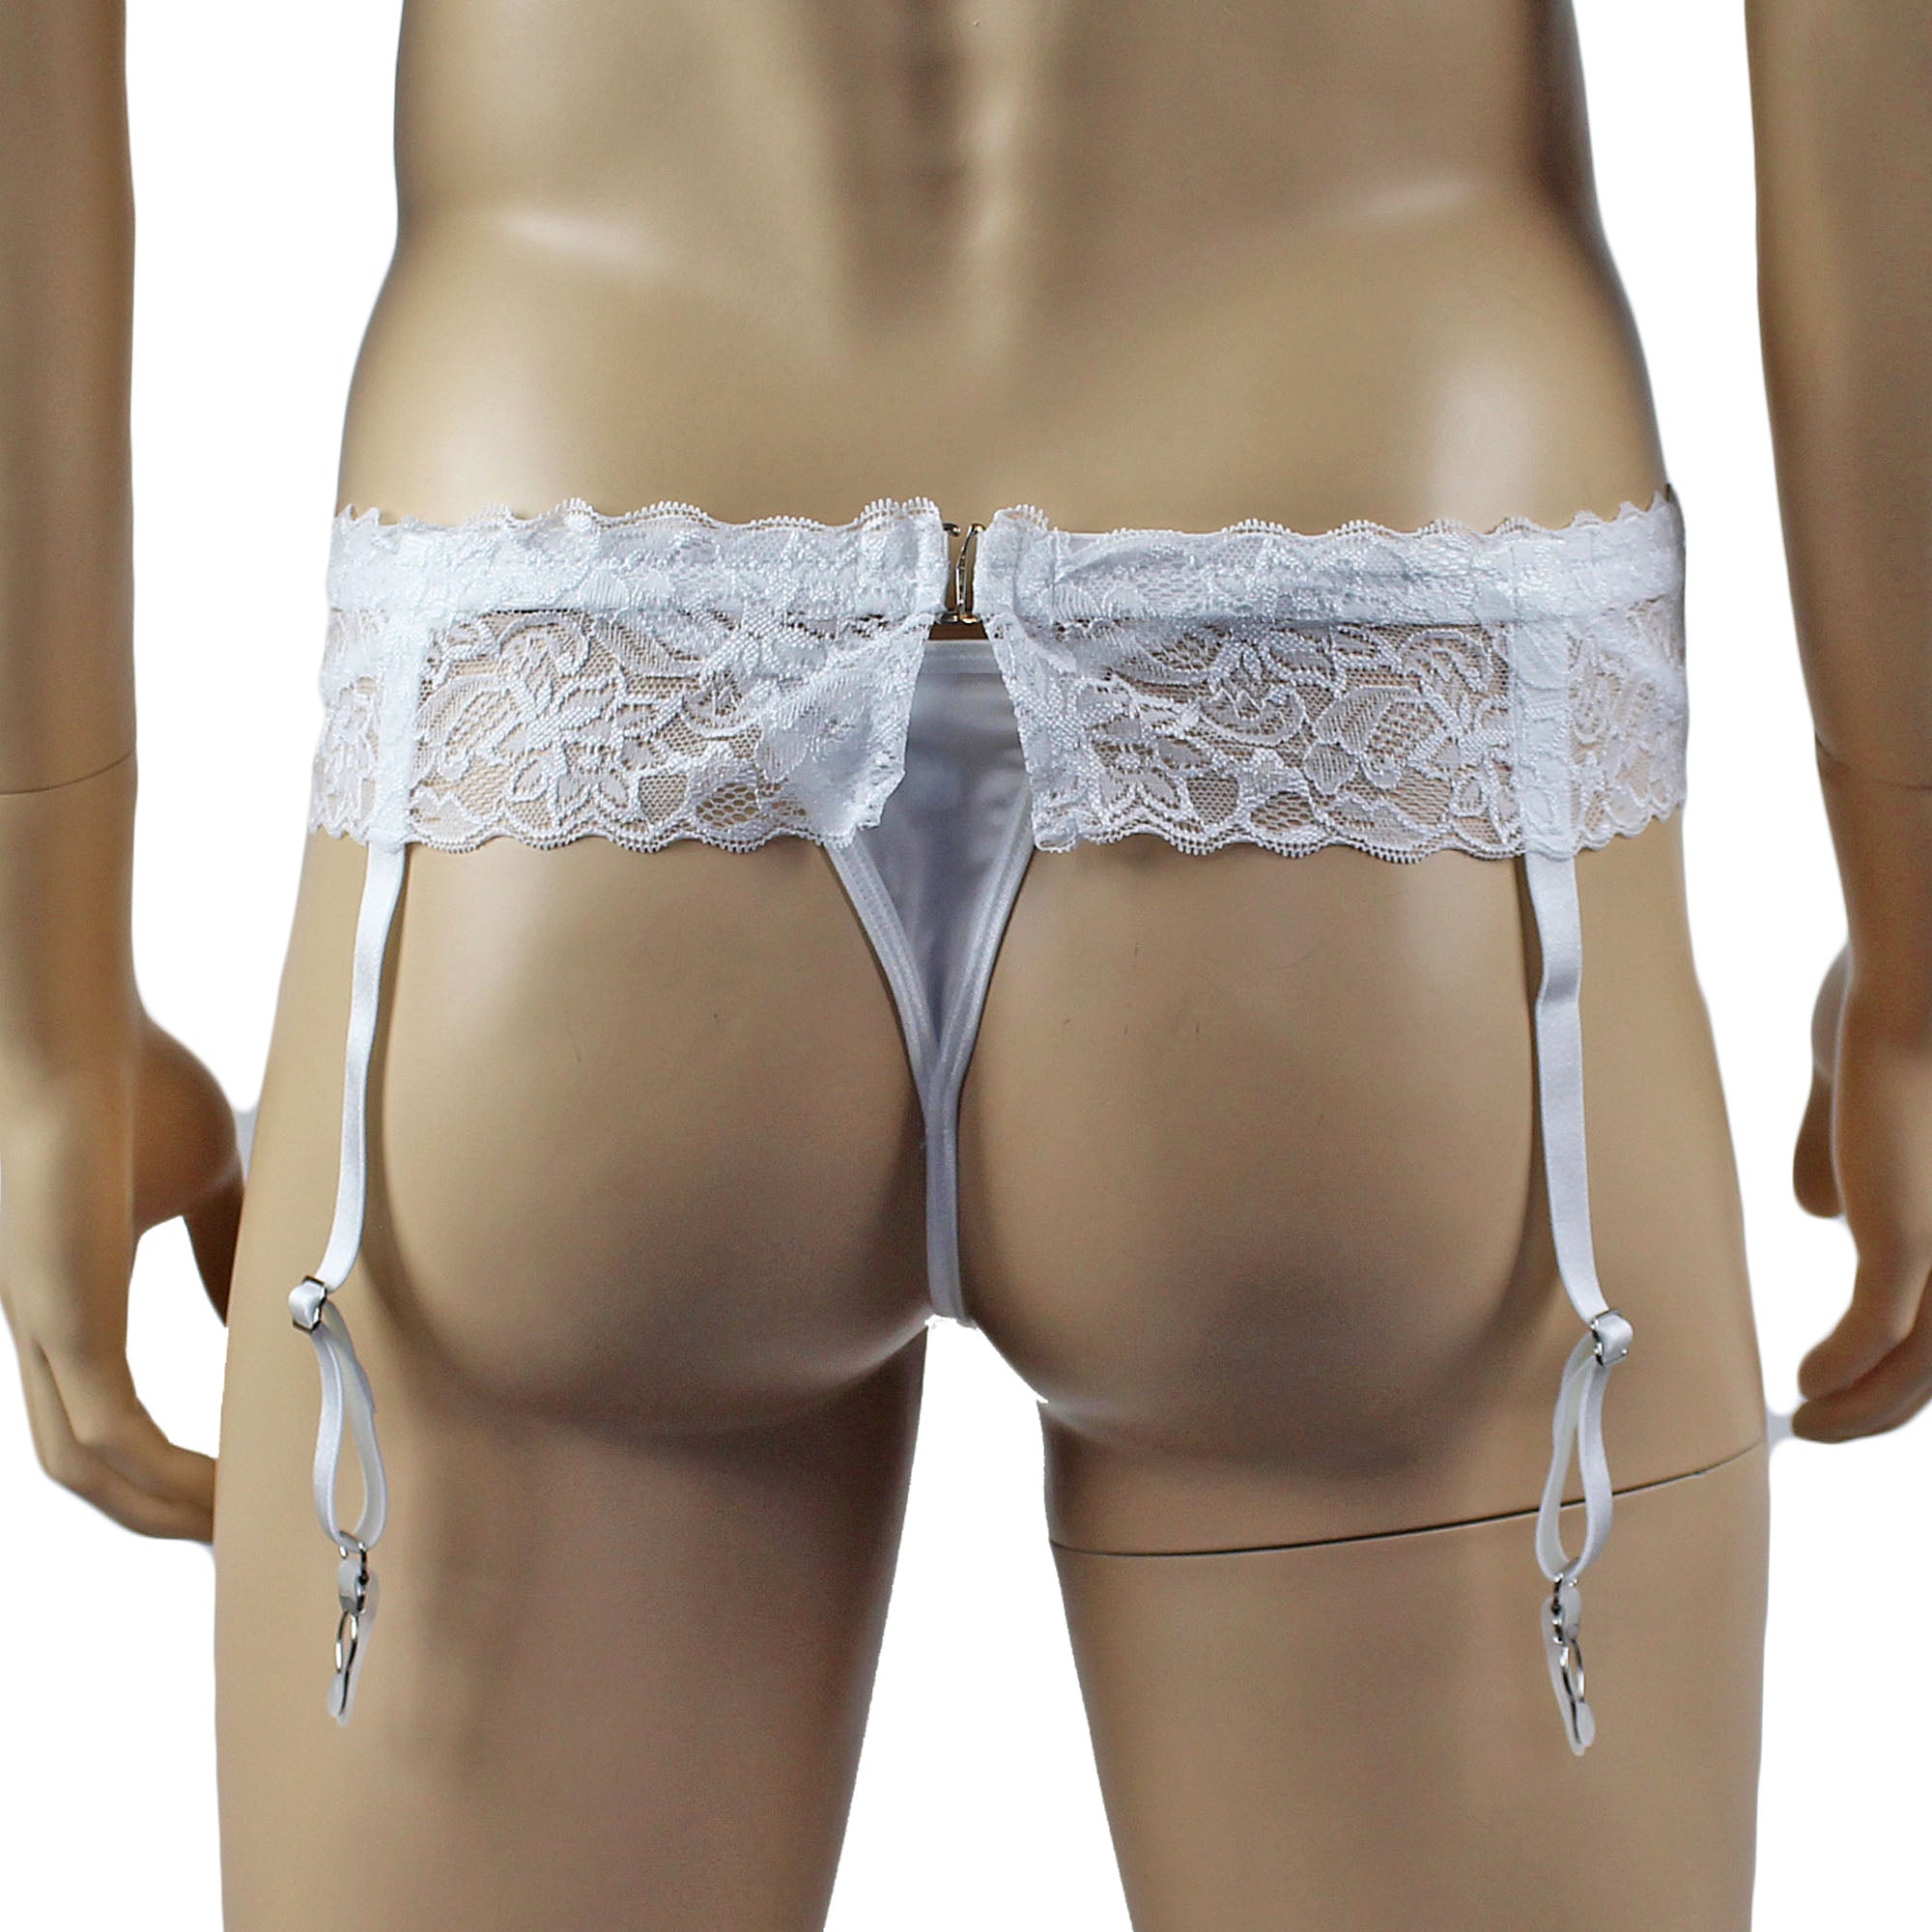 Male Penny Lingerie Stretch Spandex & Lace Pouch G string & Lace Garterbelt (white plus other colours)